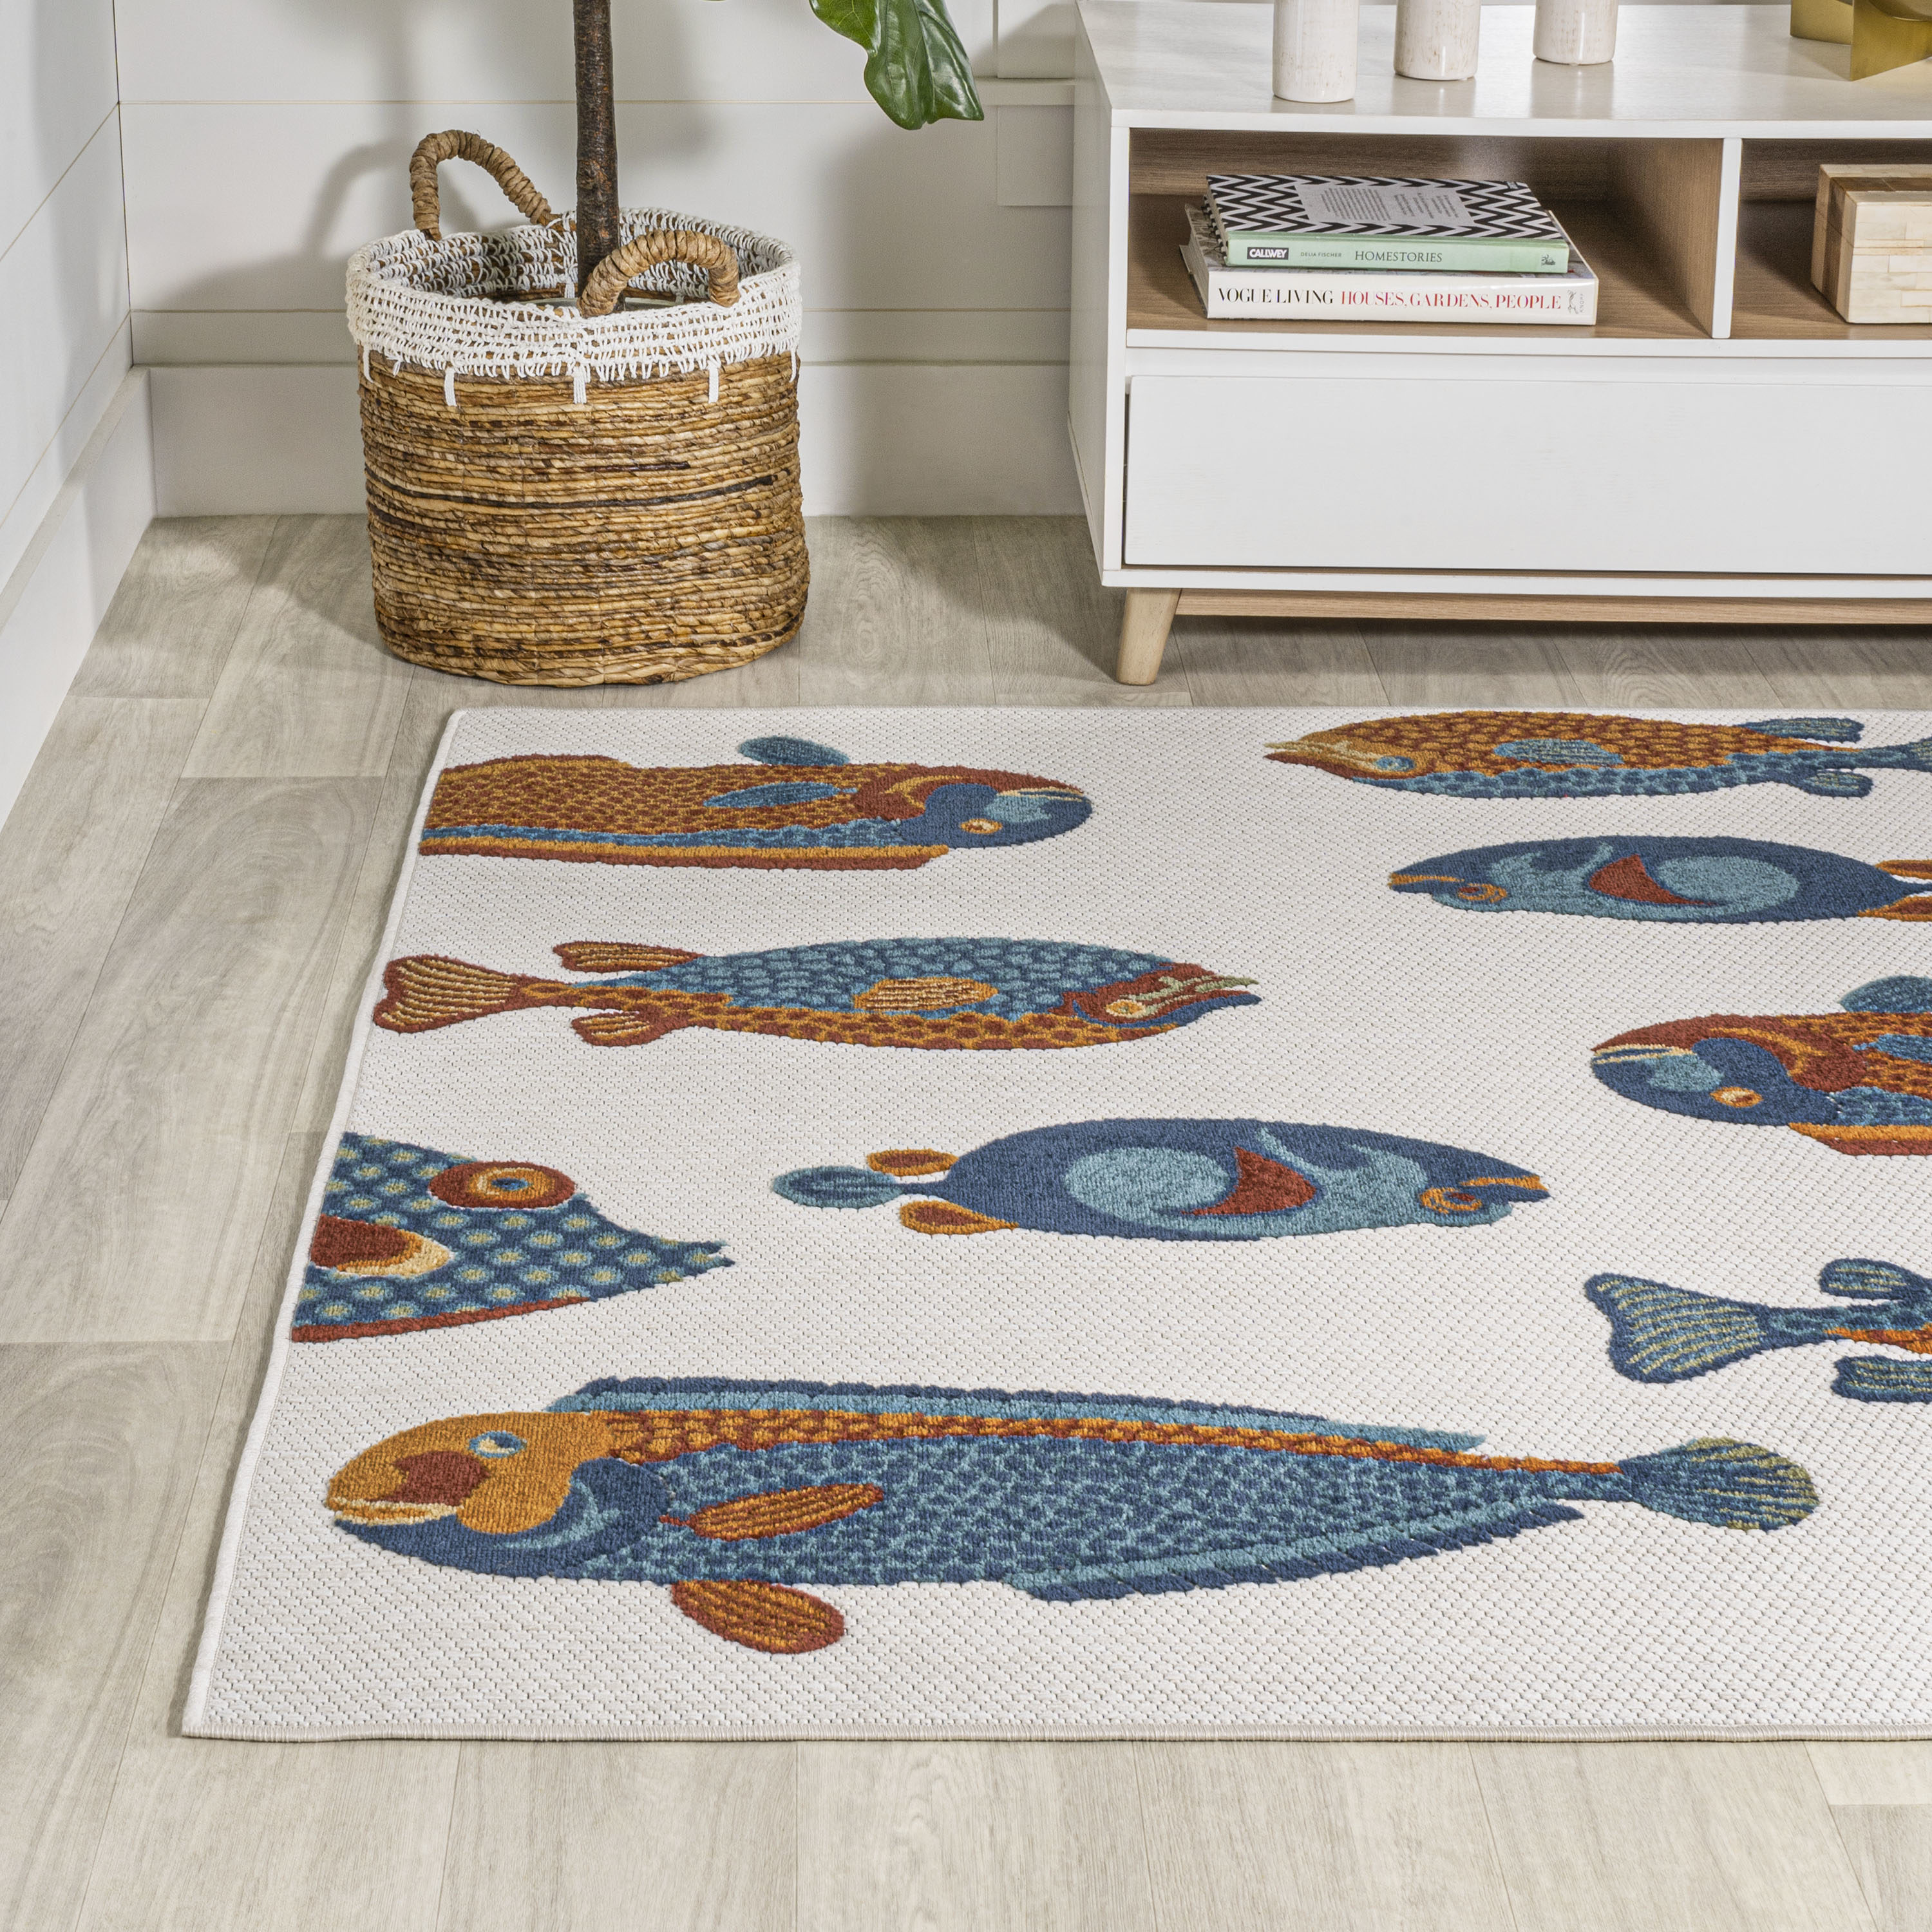 Colored Seabed Fish Plants Area Rugs Kids Living Room Soft Carpet Floor Yoga Mat 